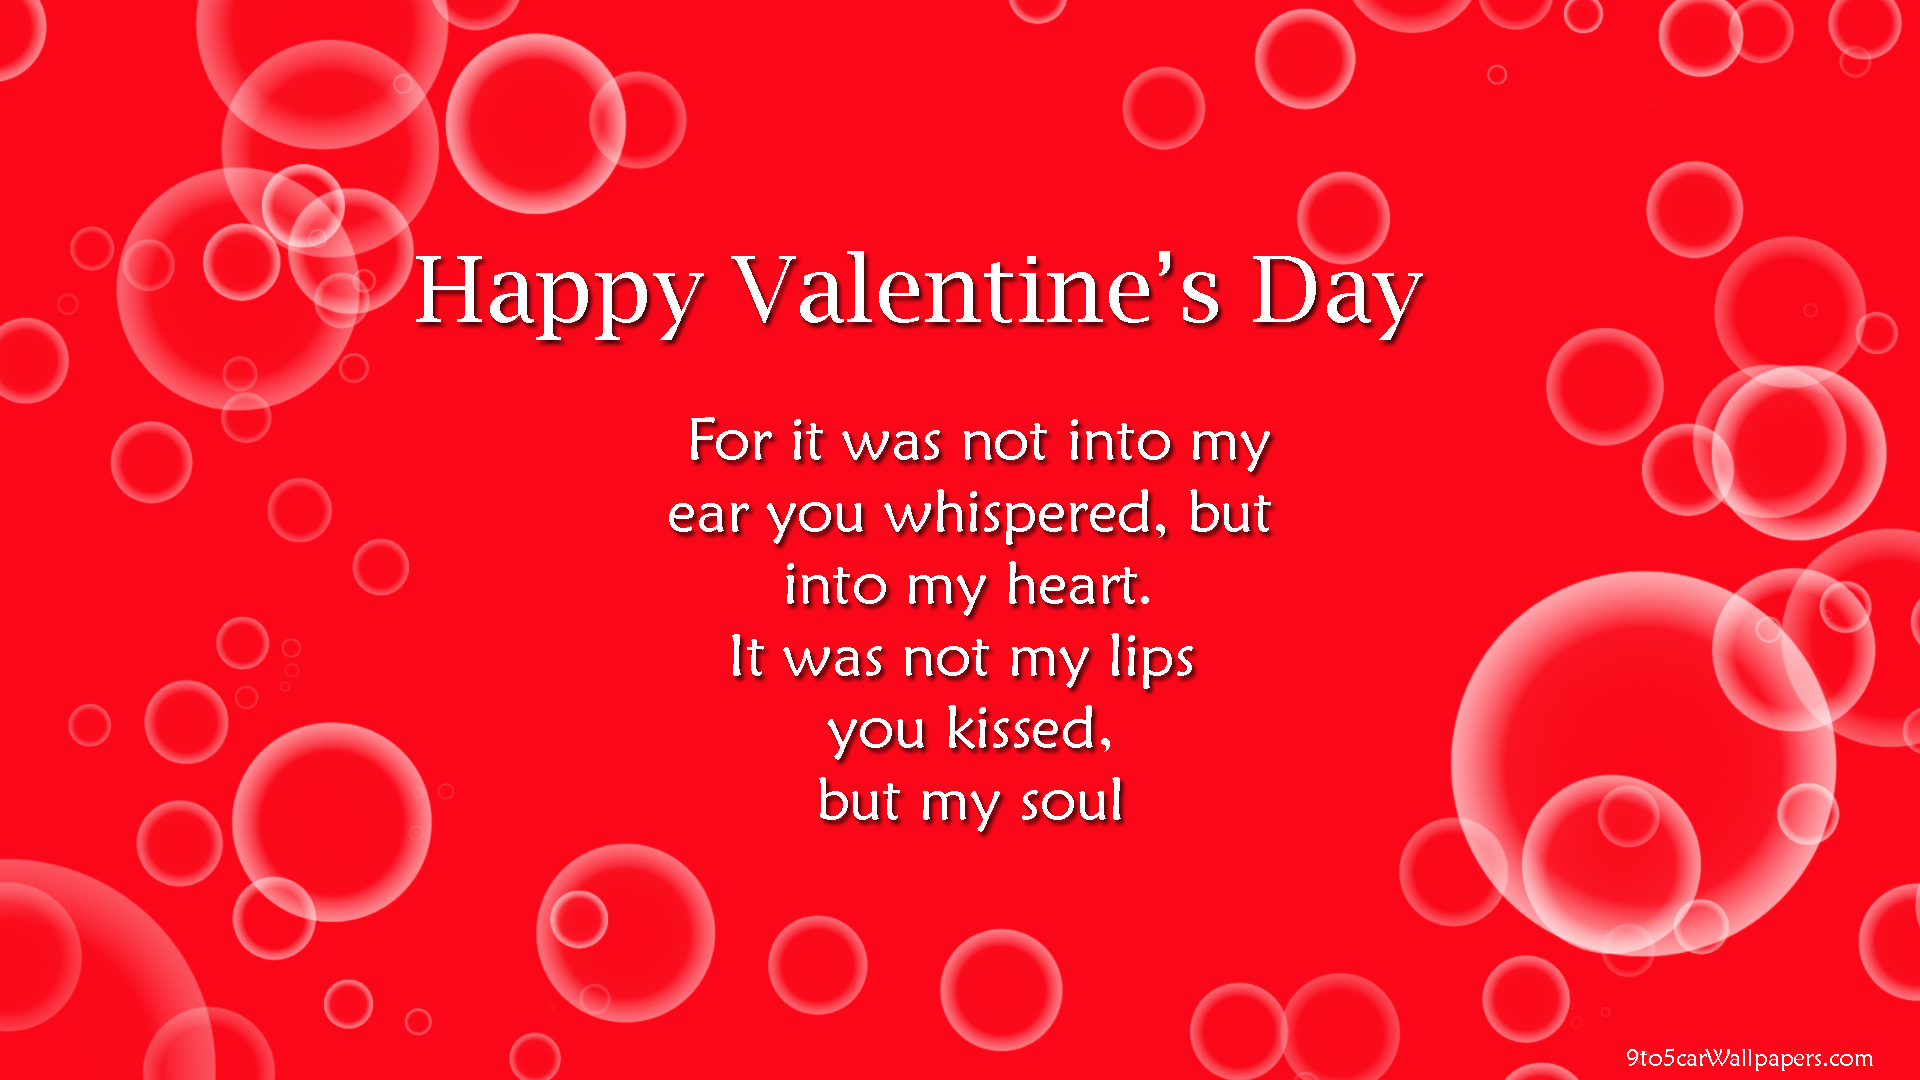 happy-valentine's-Day-images-cards-quotes